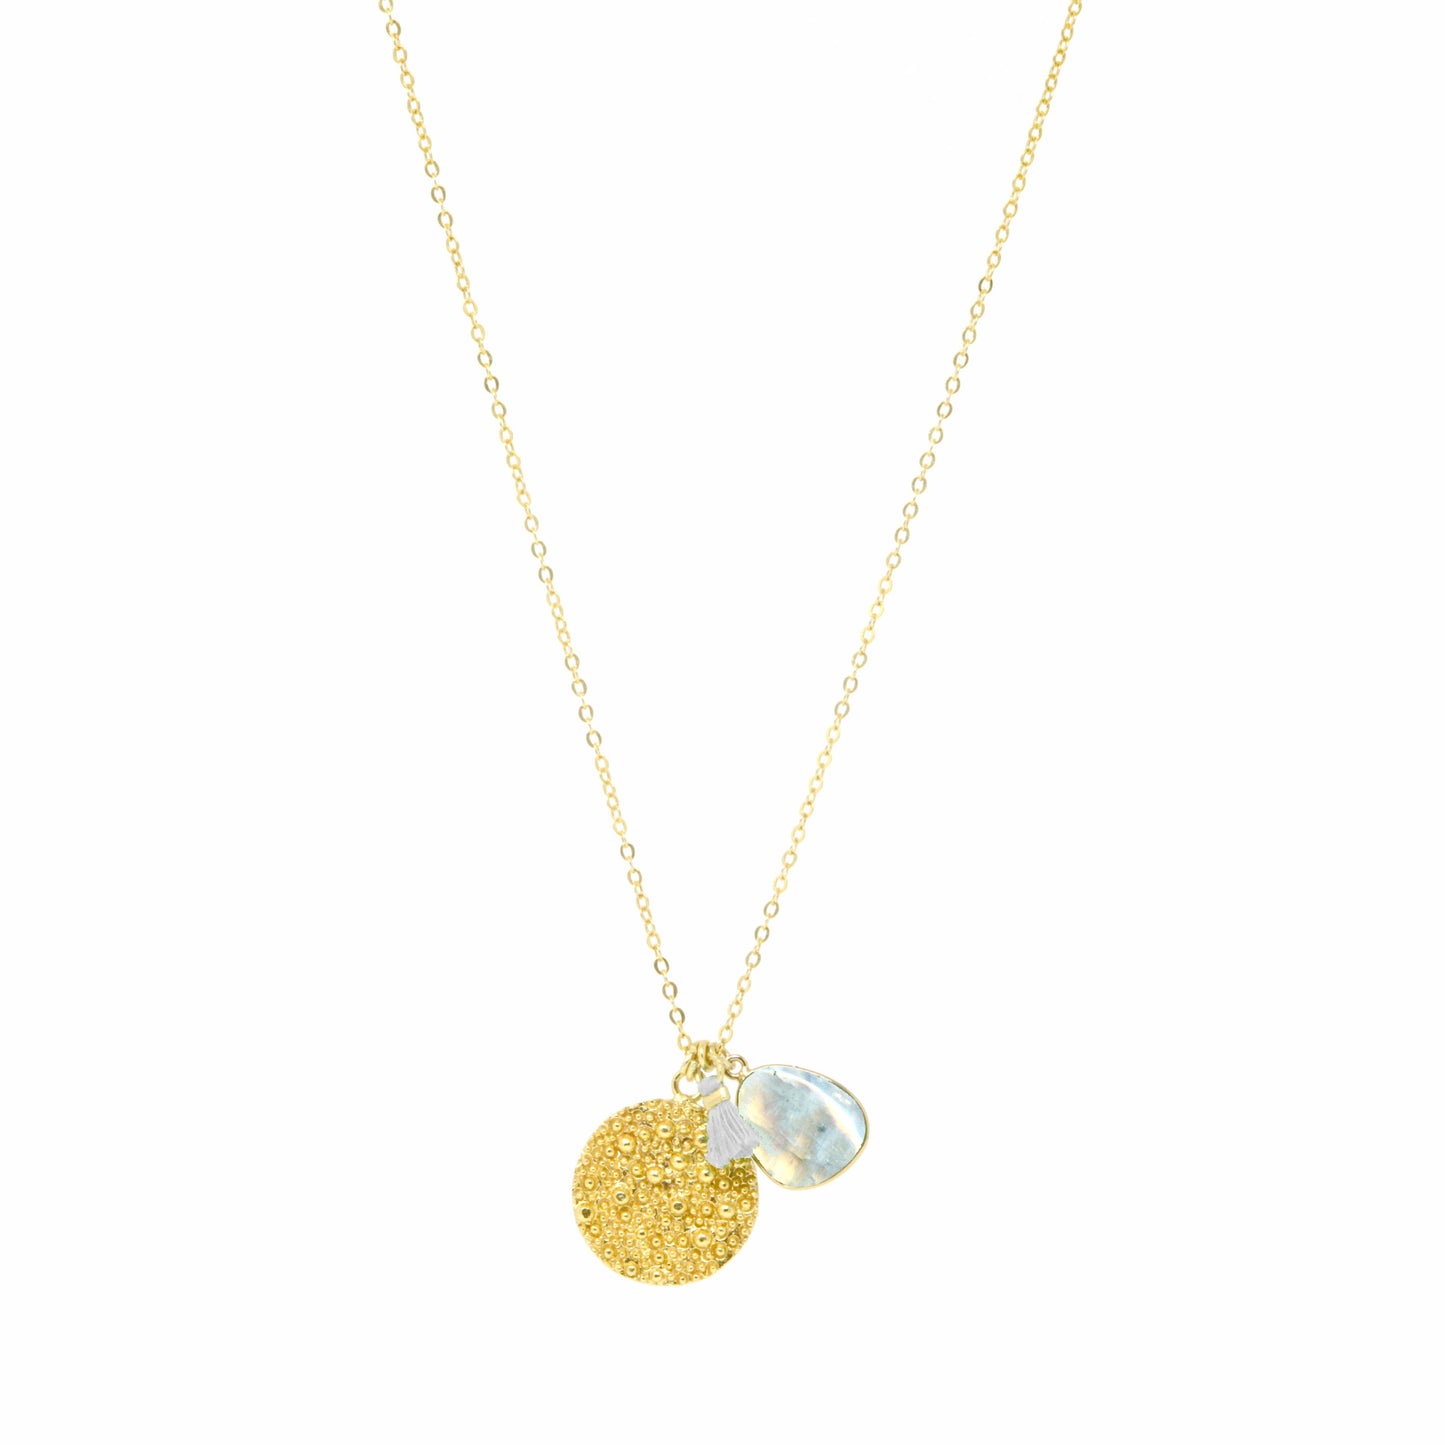 Spell coin charm necklace with Moonstone